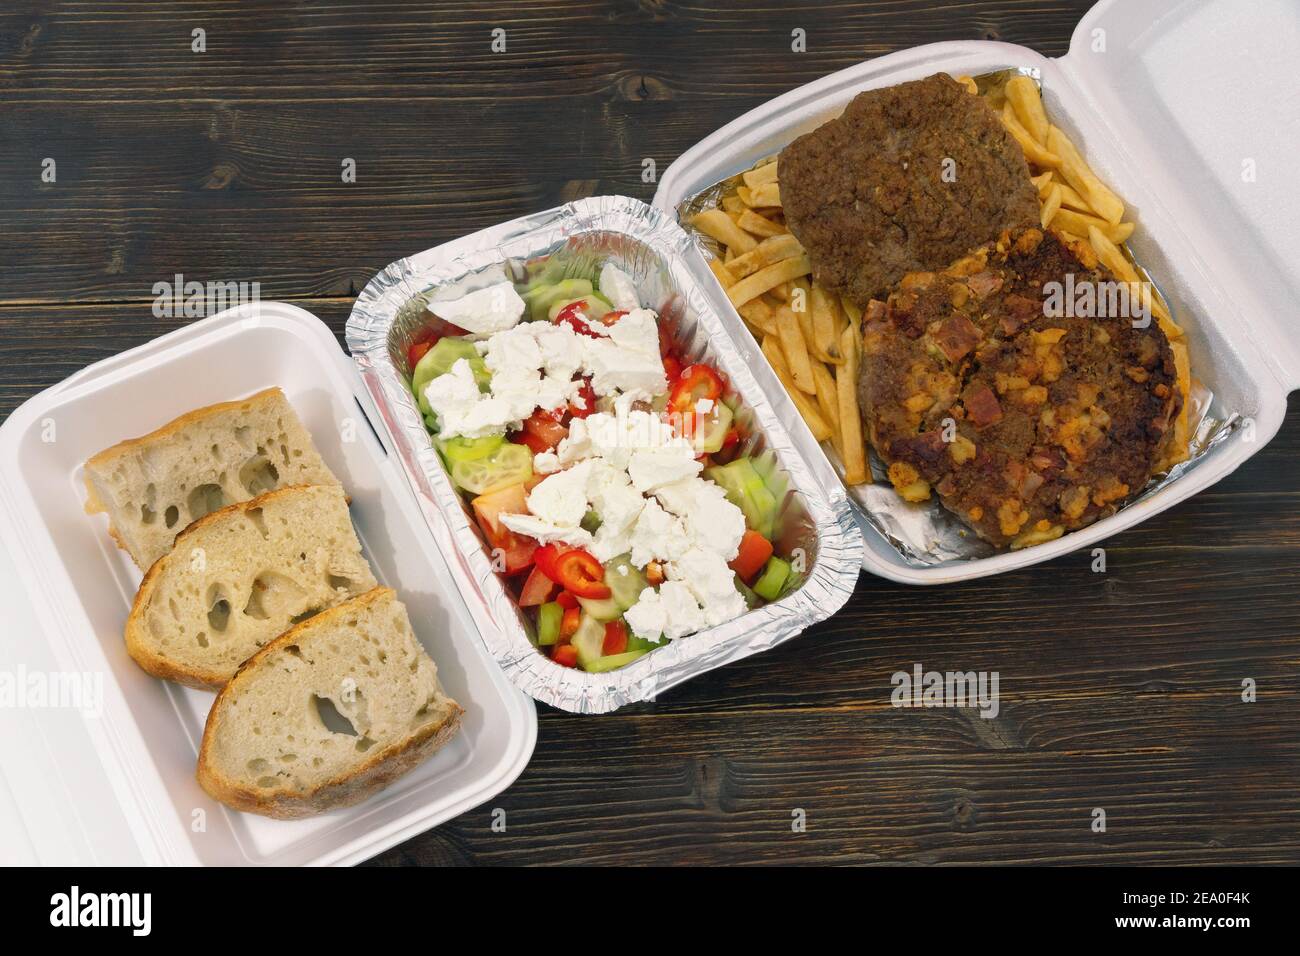 Food delivery. Bread, salad and pljeskavica - grilled dish of minced meat,  french fries in takeaway containers on rustic wooden table Stock Photo